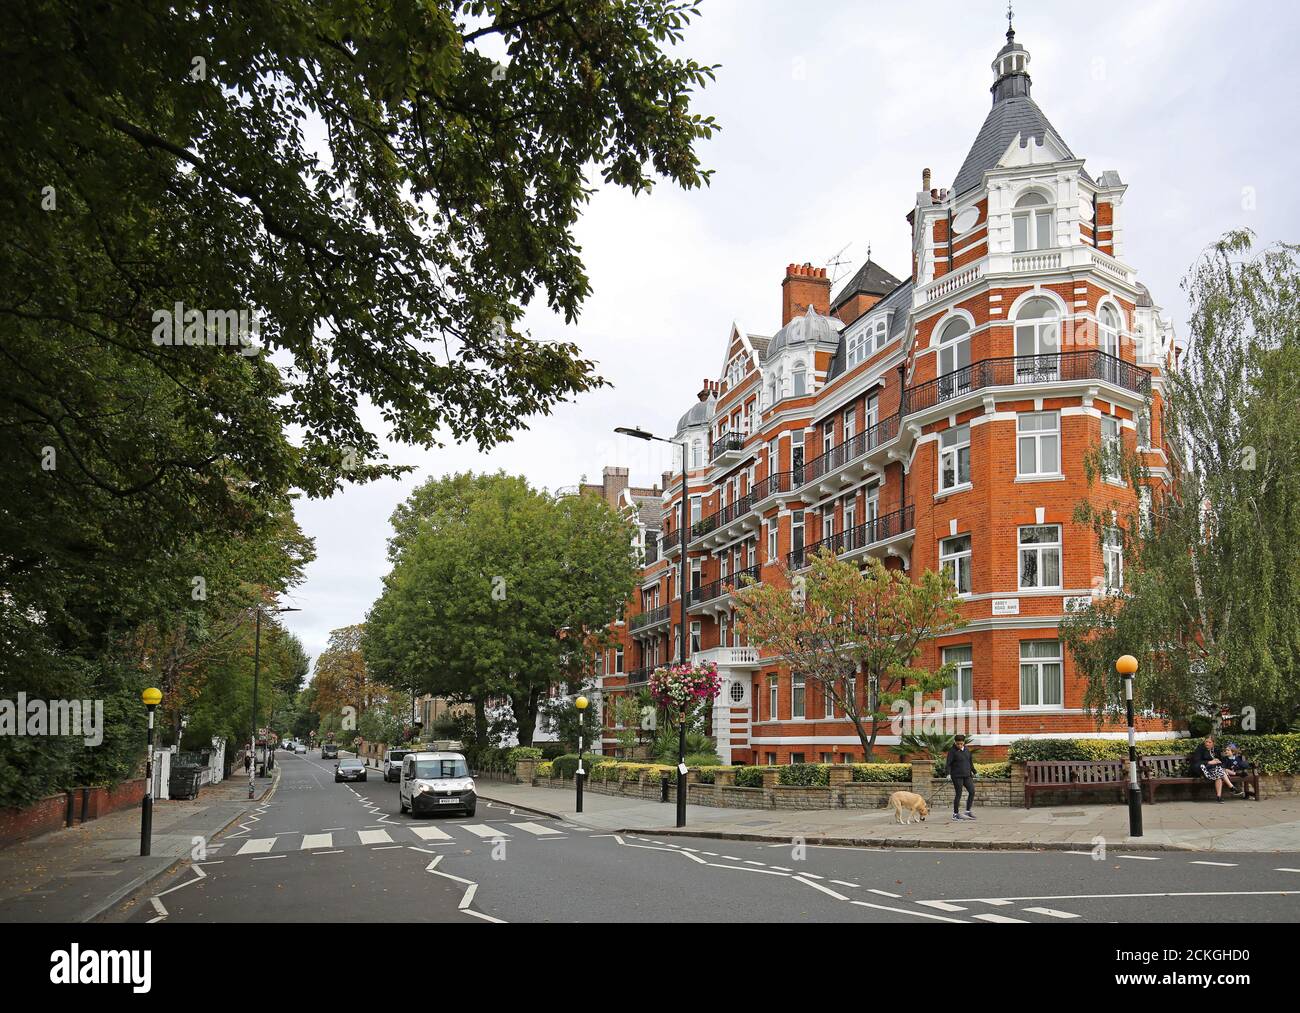 Abbey Road, London. Neville Court, (right) an ornate, newly refurbished 1930s tenement block opposite the zebra crossing made famous by the Beatles. Stock Photo